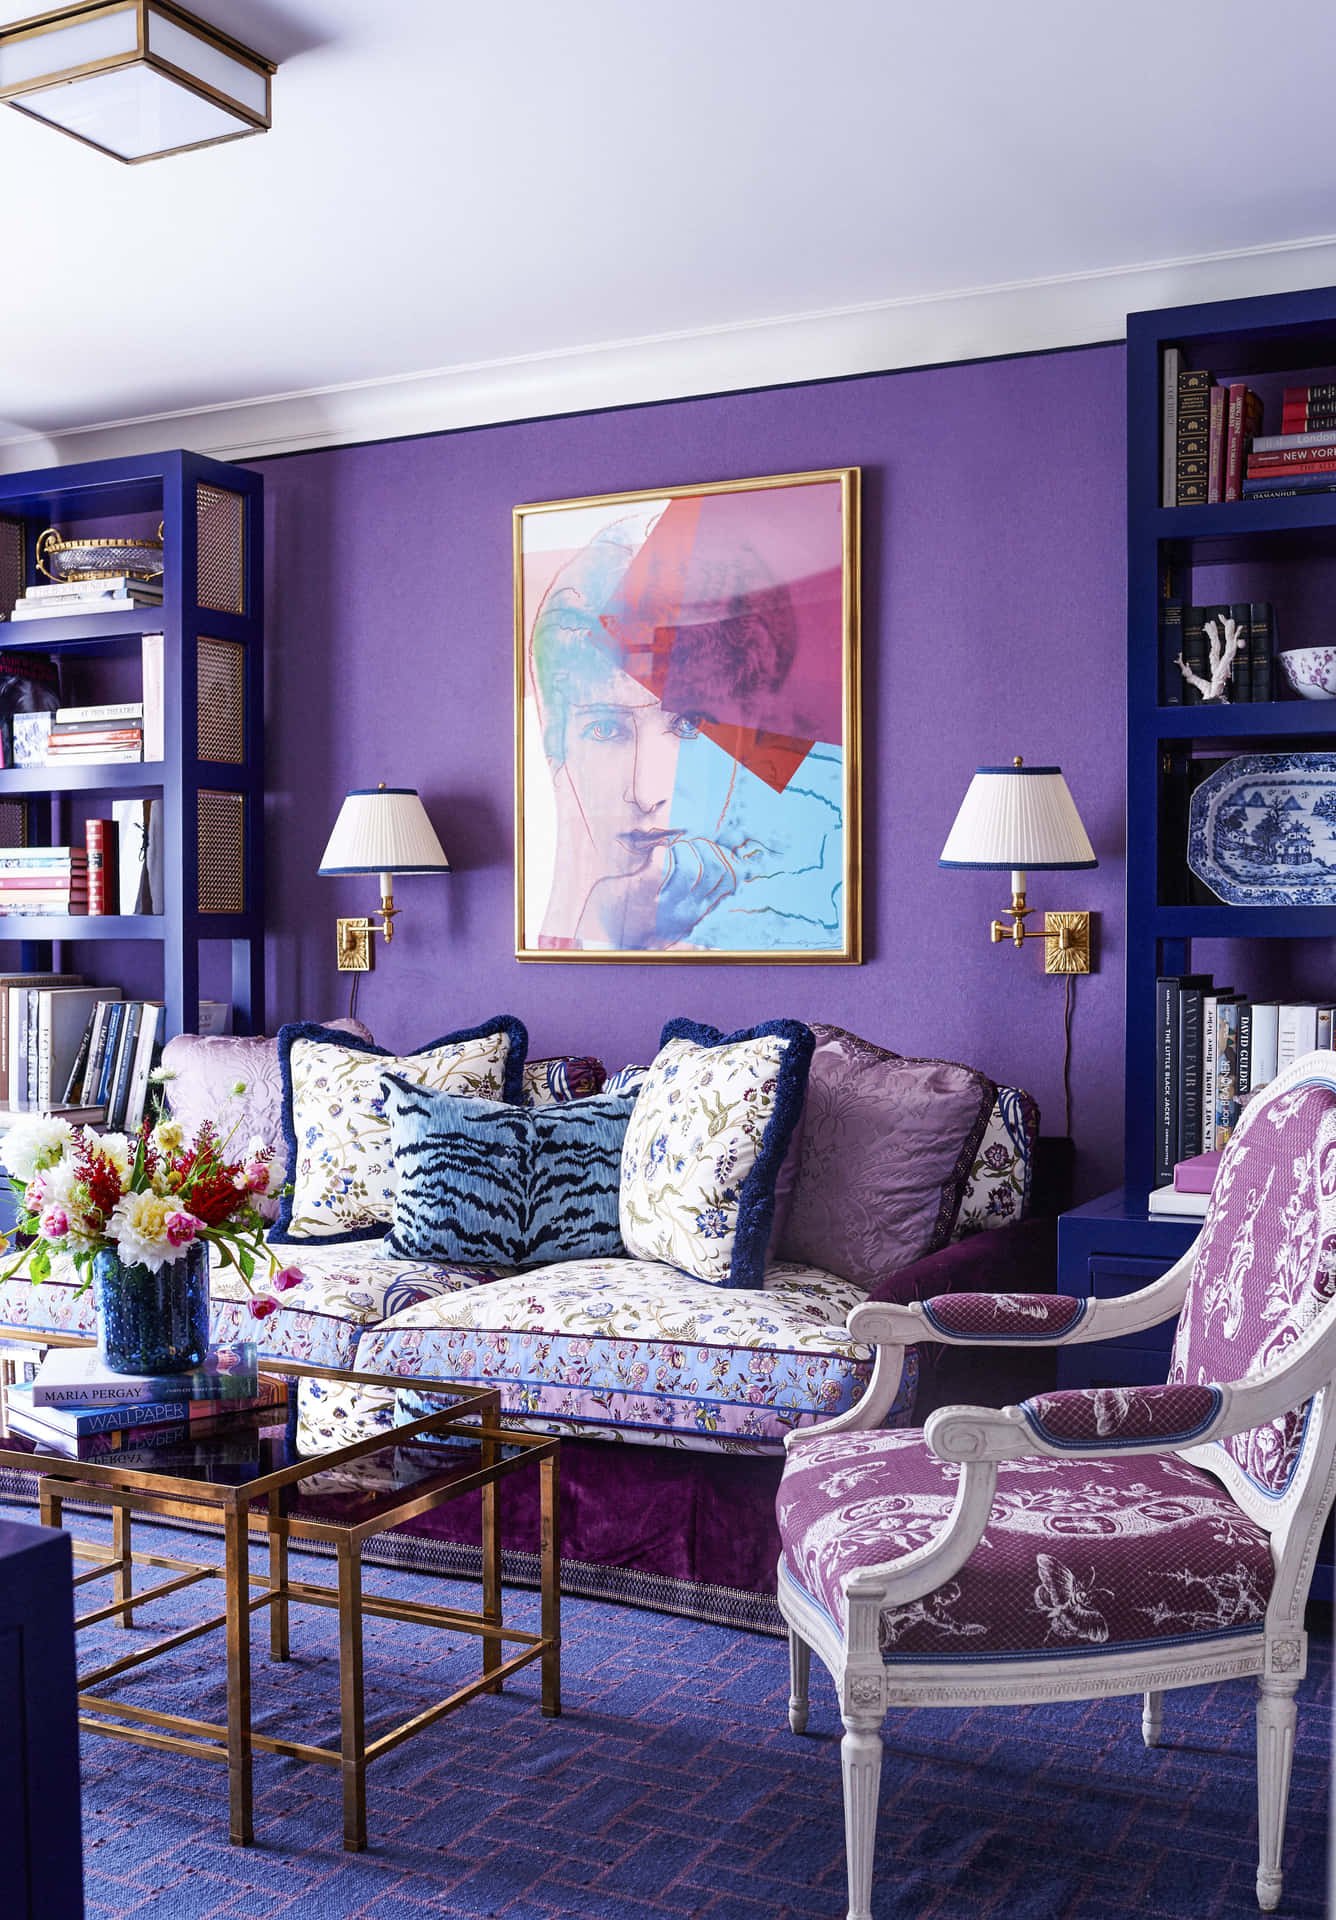 Luxurious Purple Decor for Any Room" Wallpaper